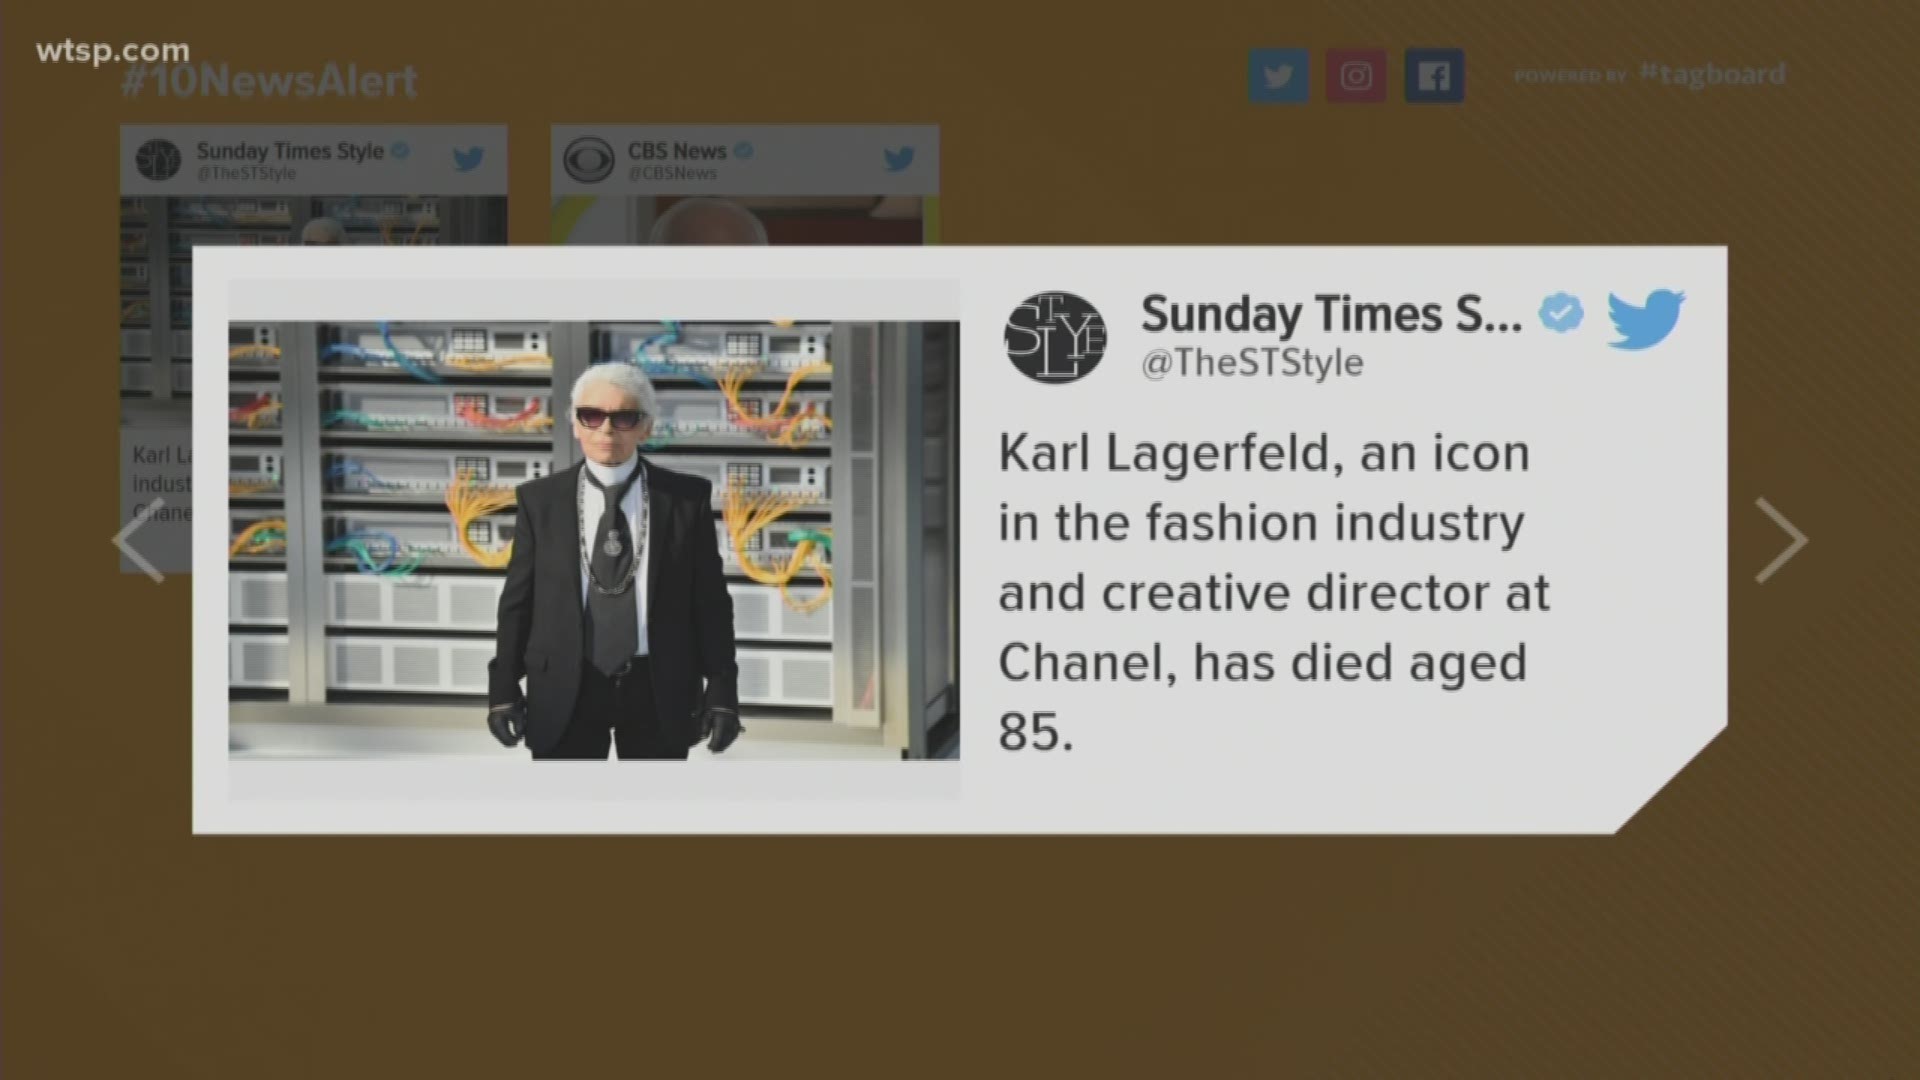 Chanel confirmed that Karl Lagerfeld died early Tuesday.